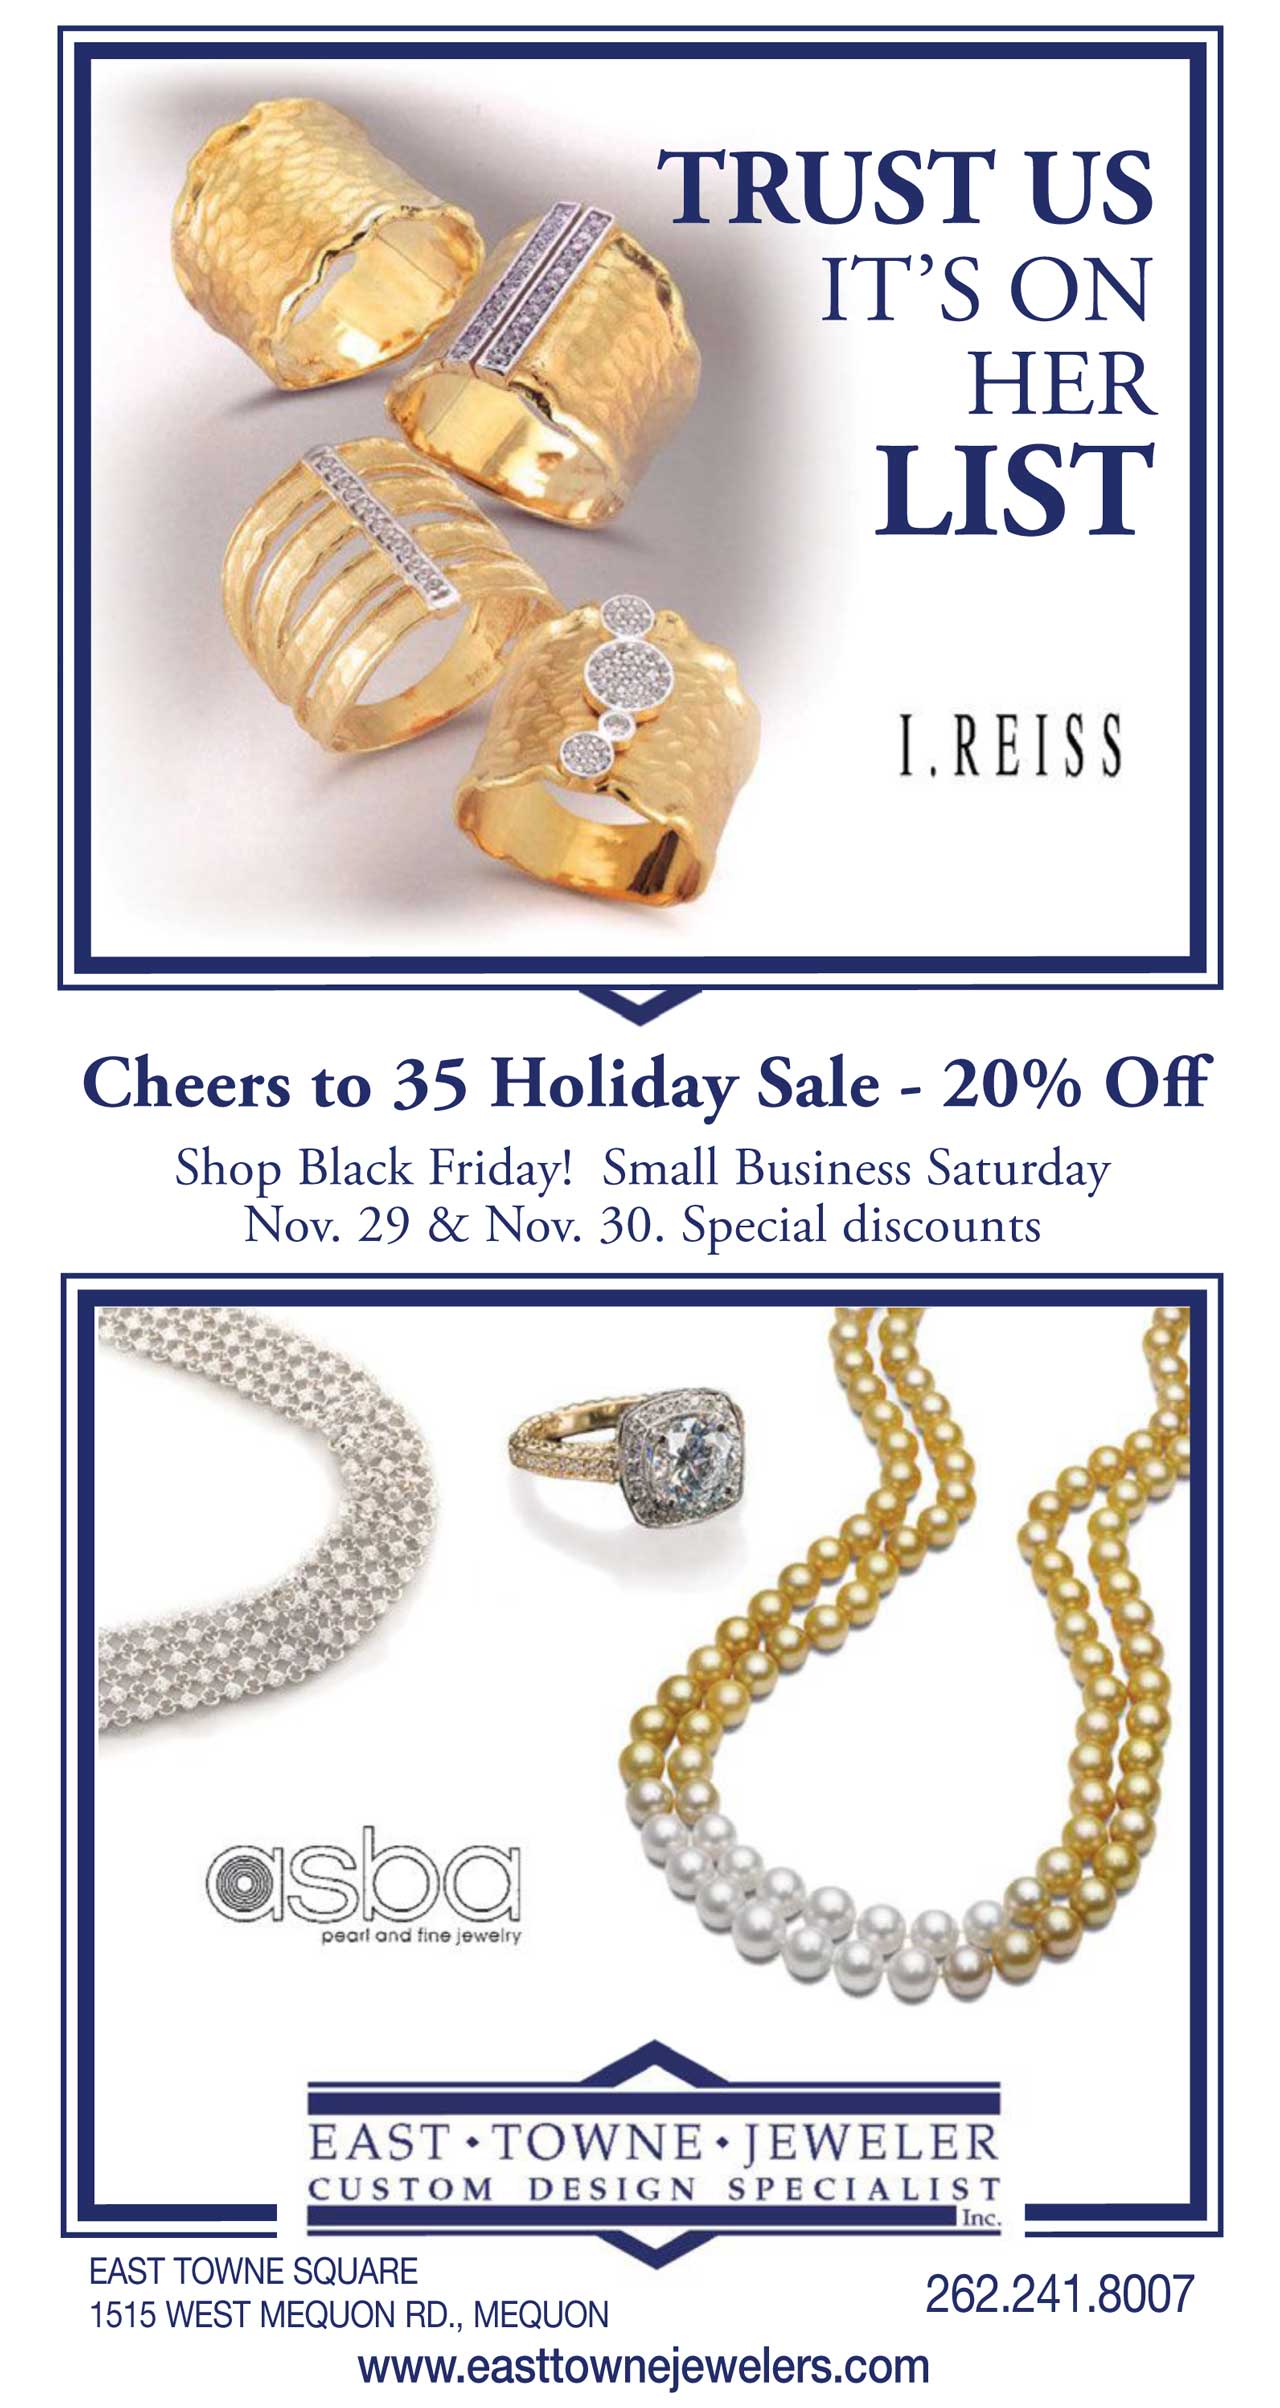 Holiday Sale 2019 | East Towne Jewelers | Mequon, WI